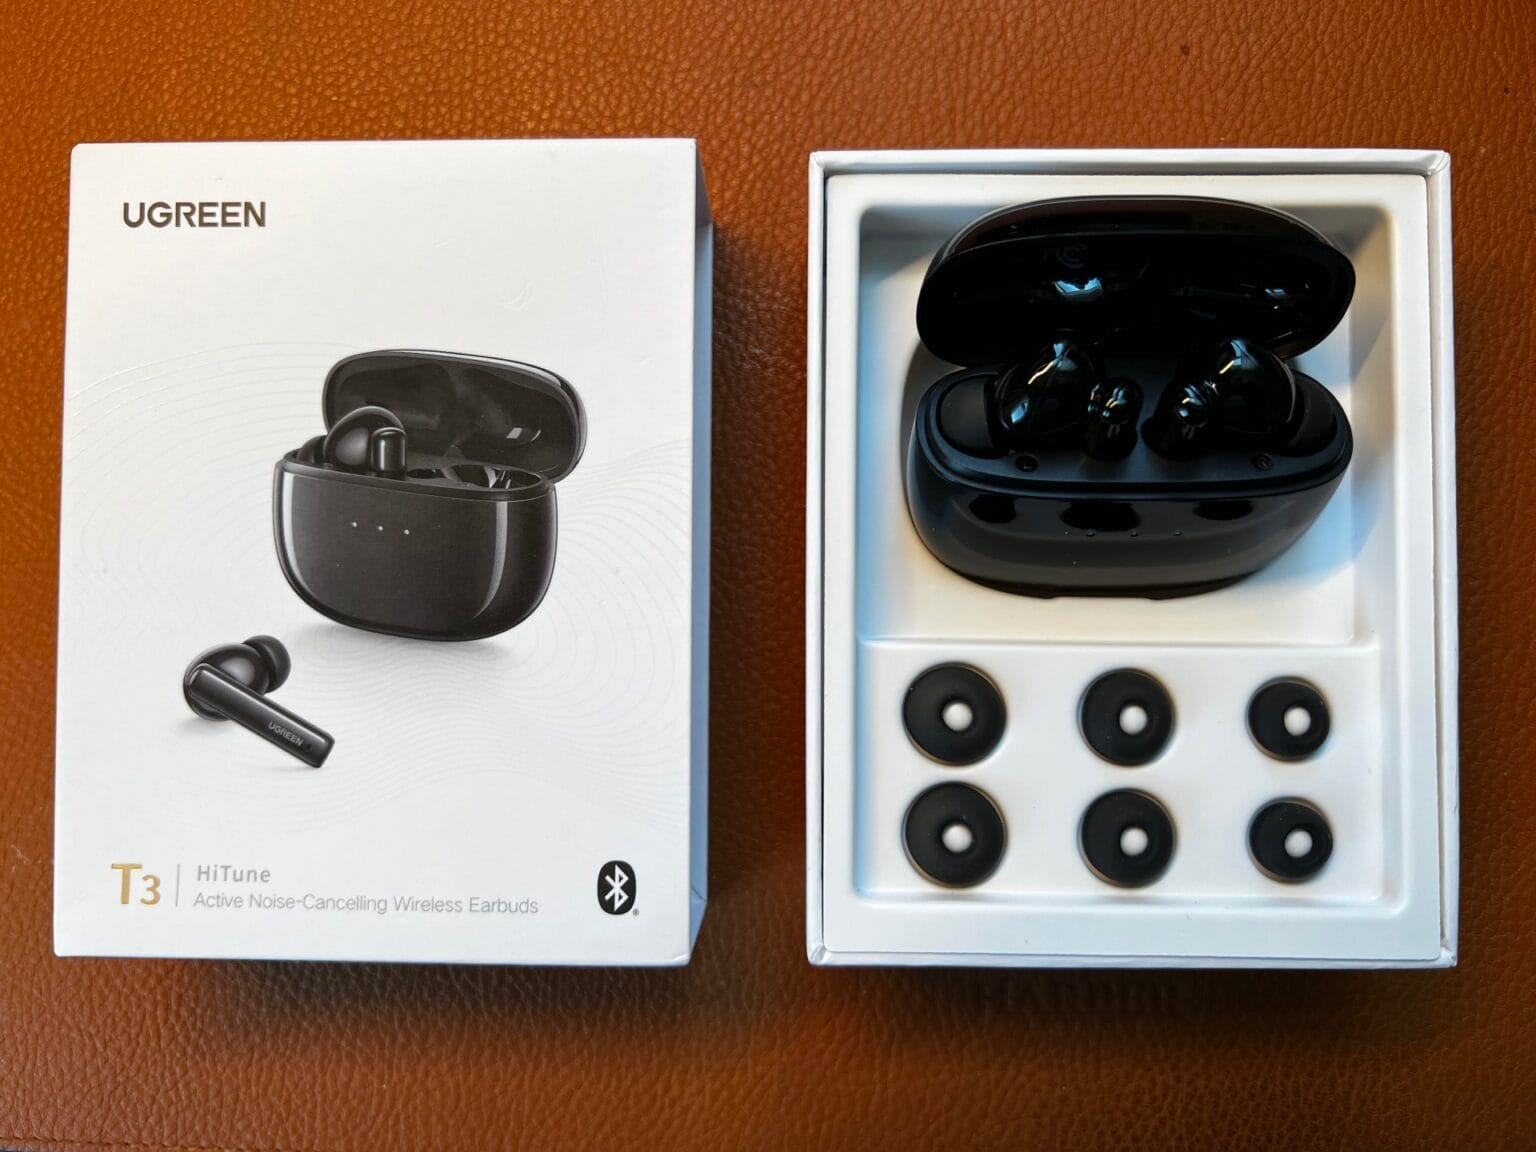 The Ugreen T3 HiTune earbuds will get the job done for many folks on a budget.